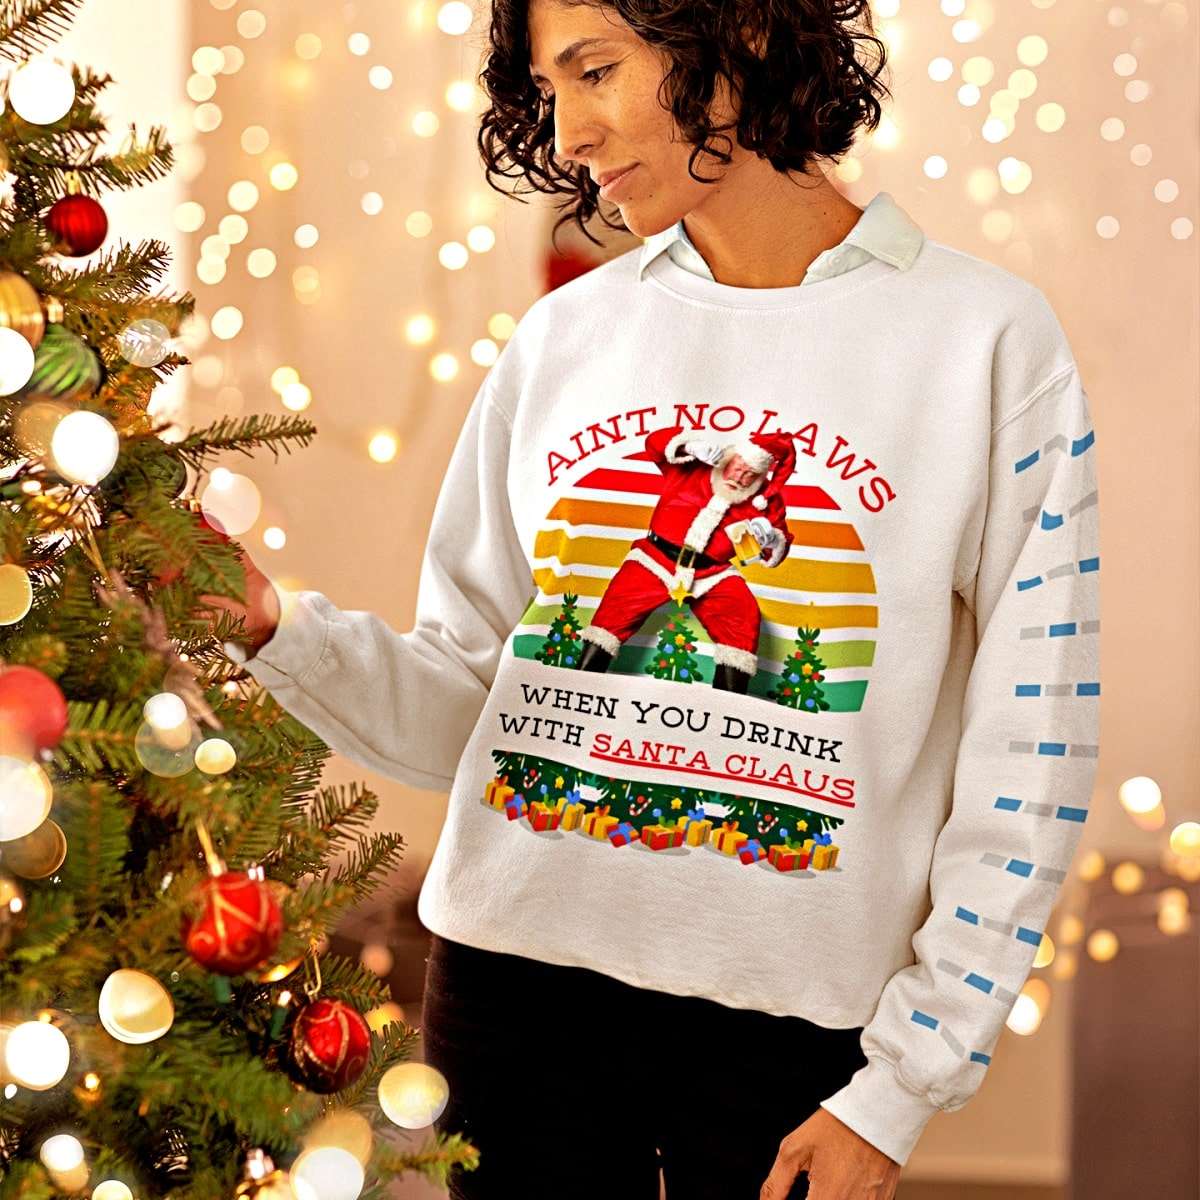 Aint No Laws When You Drink With Santa Claus Heavy Blend Funny Christmas Sweater - Santaland